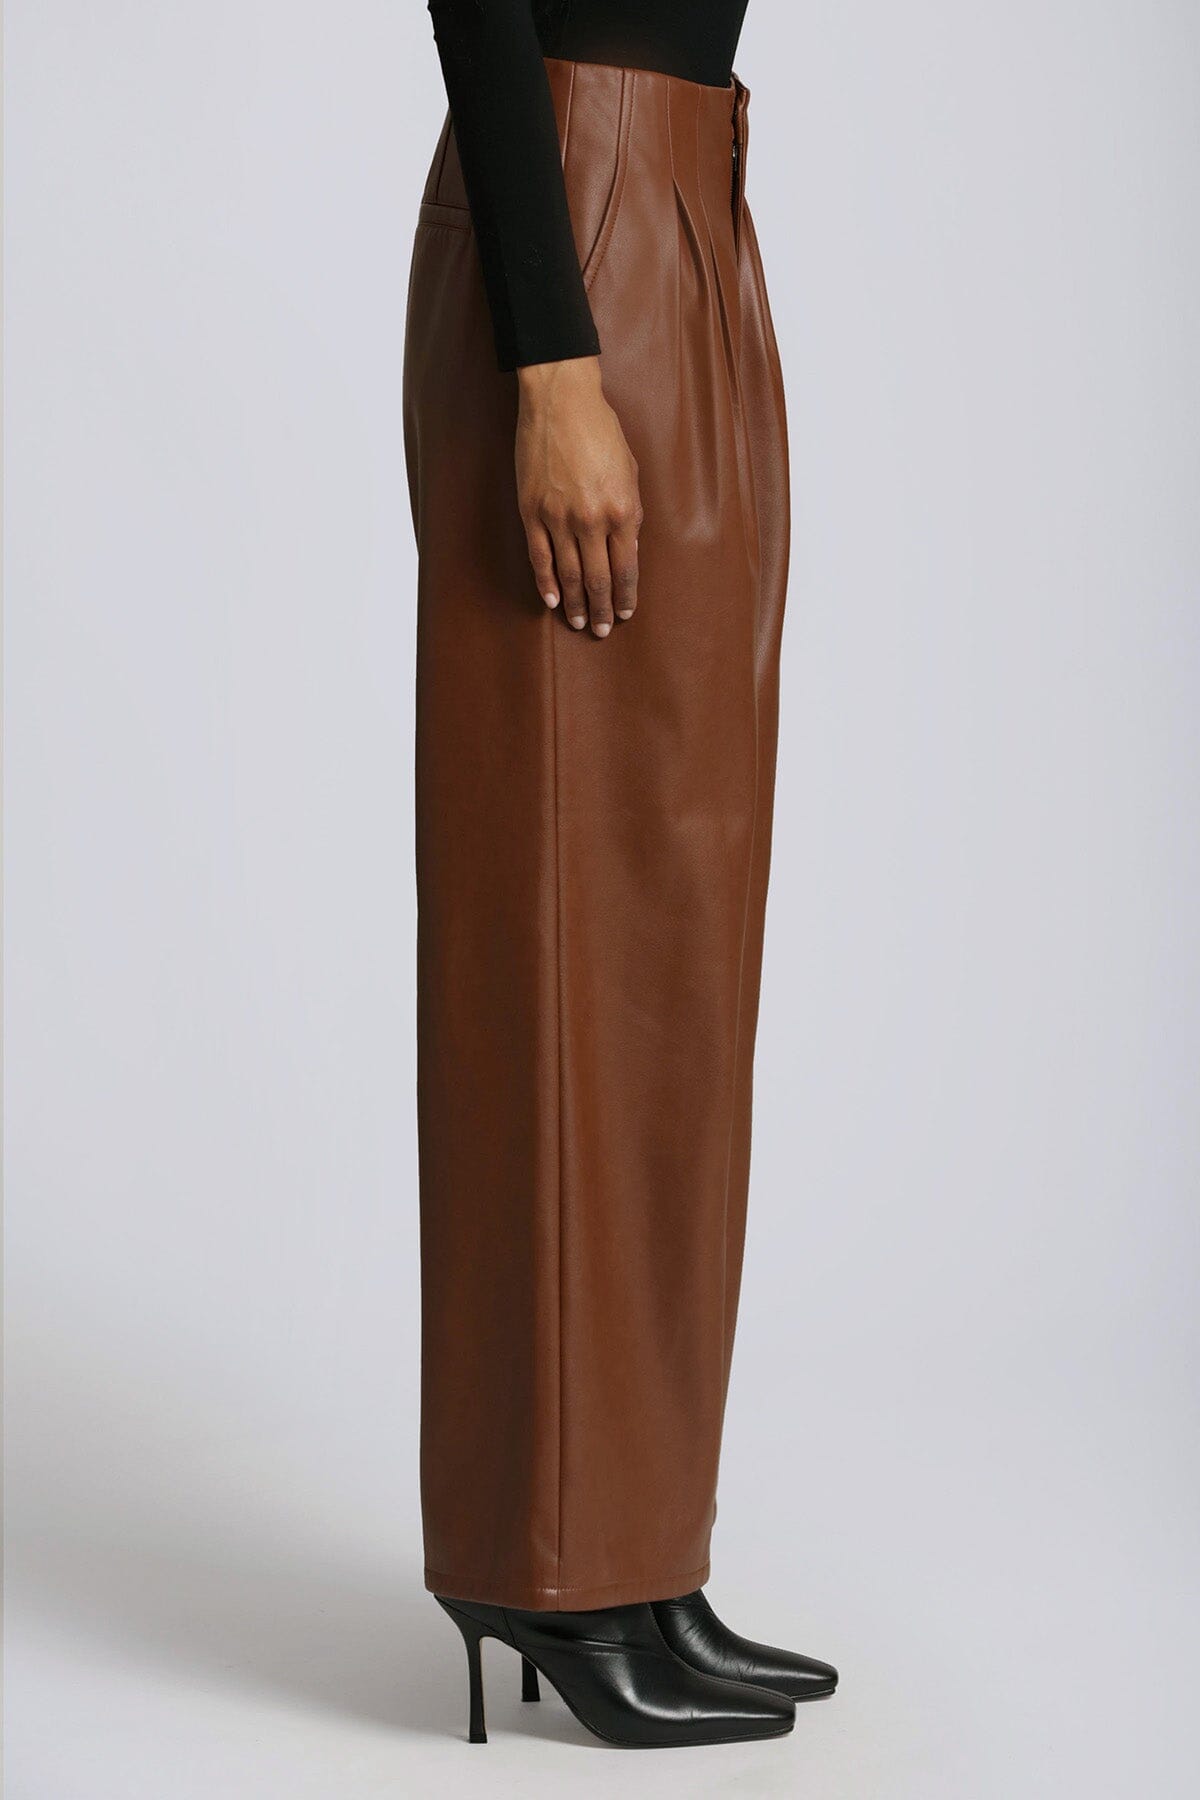 Sienna brown faux ever leather pleated wide leg trouser pant - women's figure flattering trousers pants for fall 2023